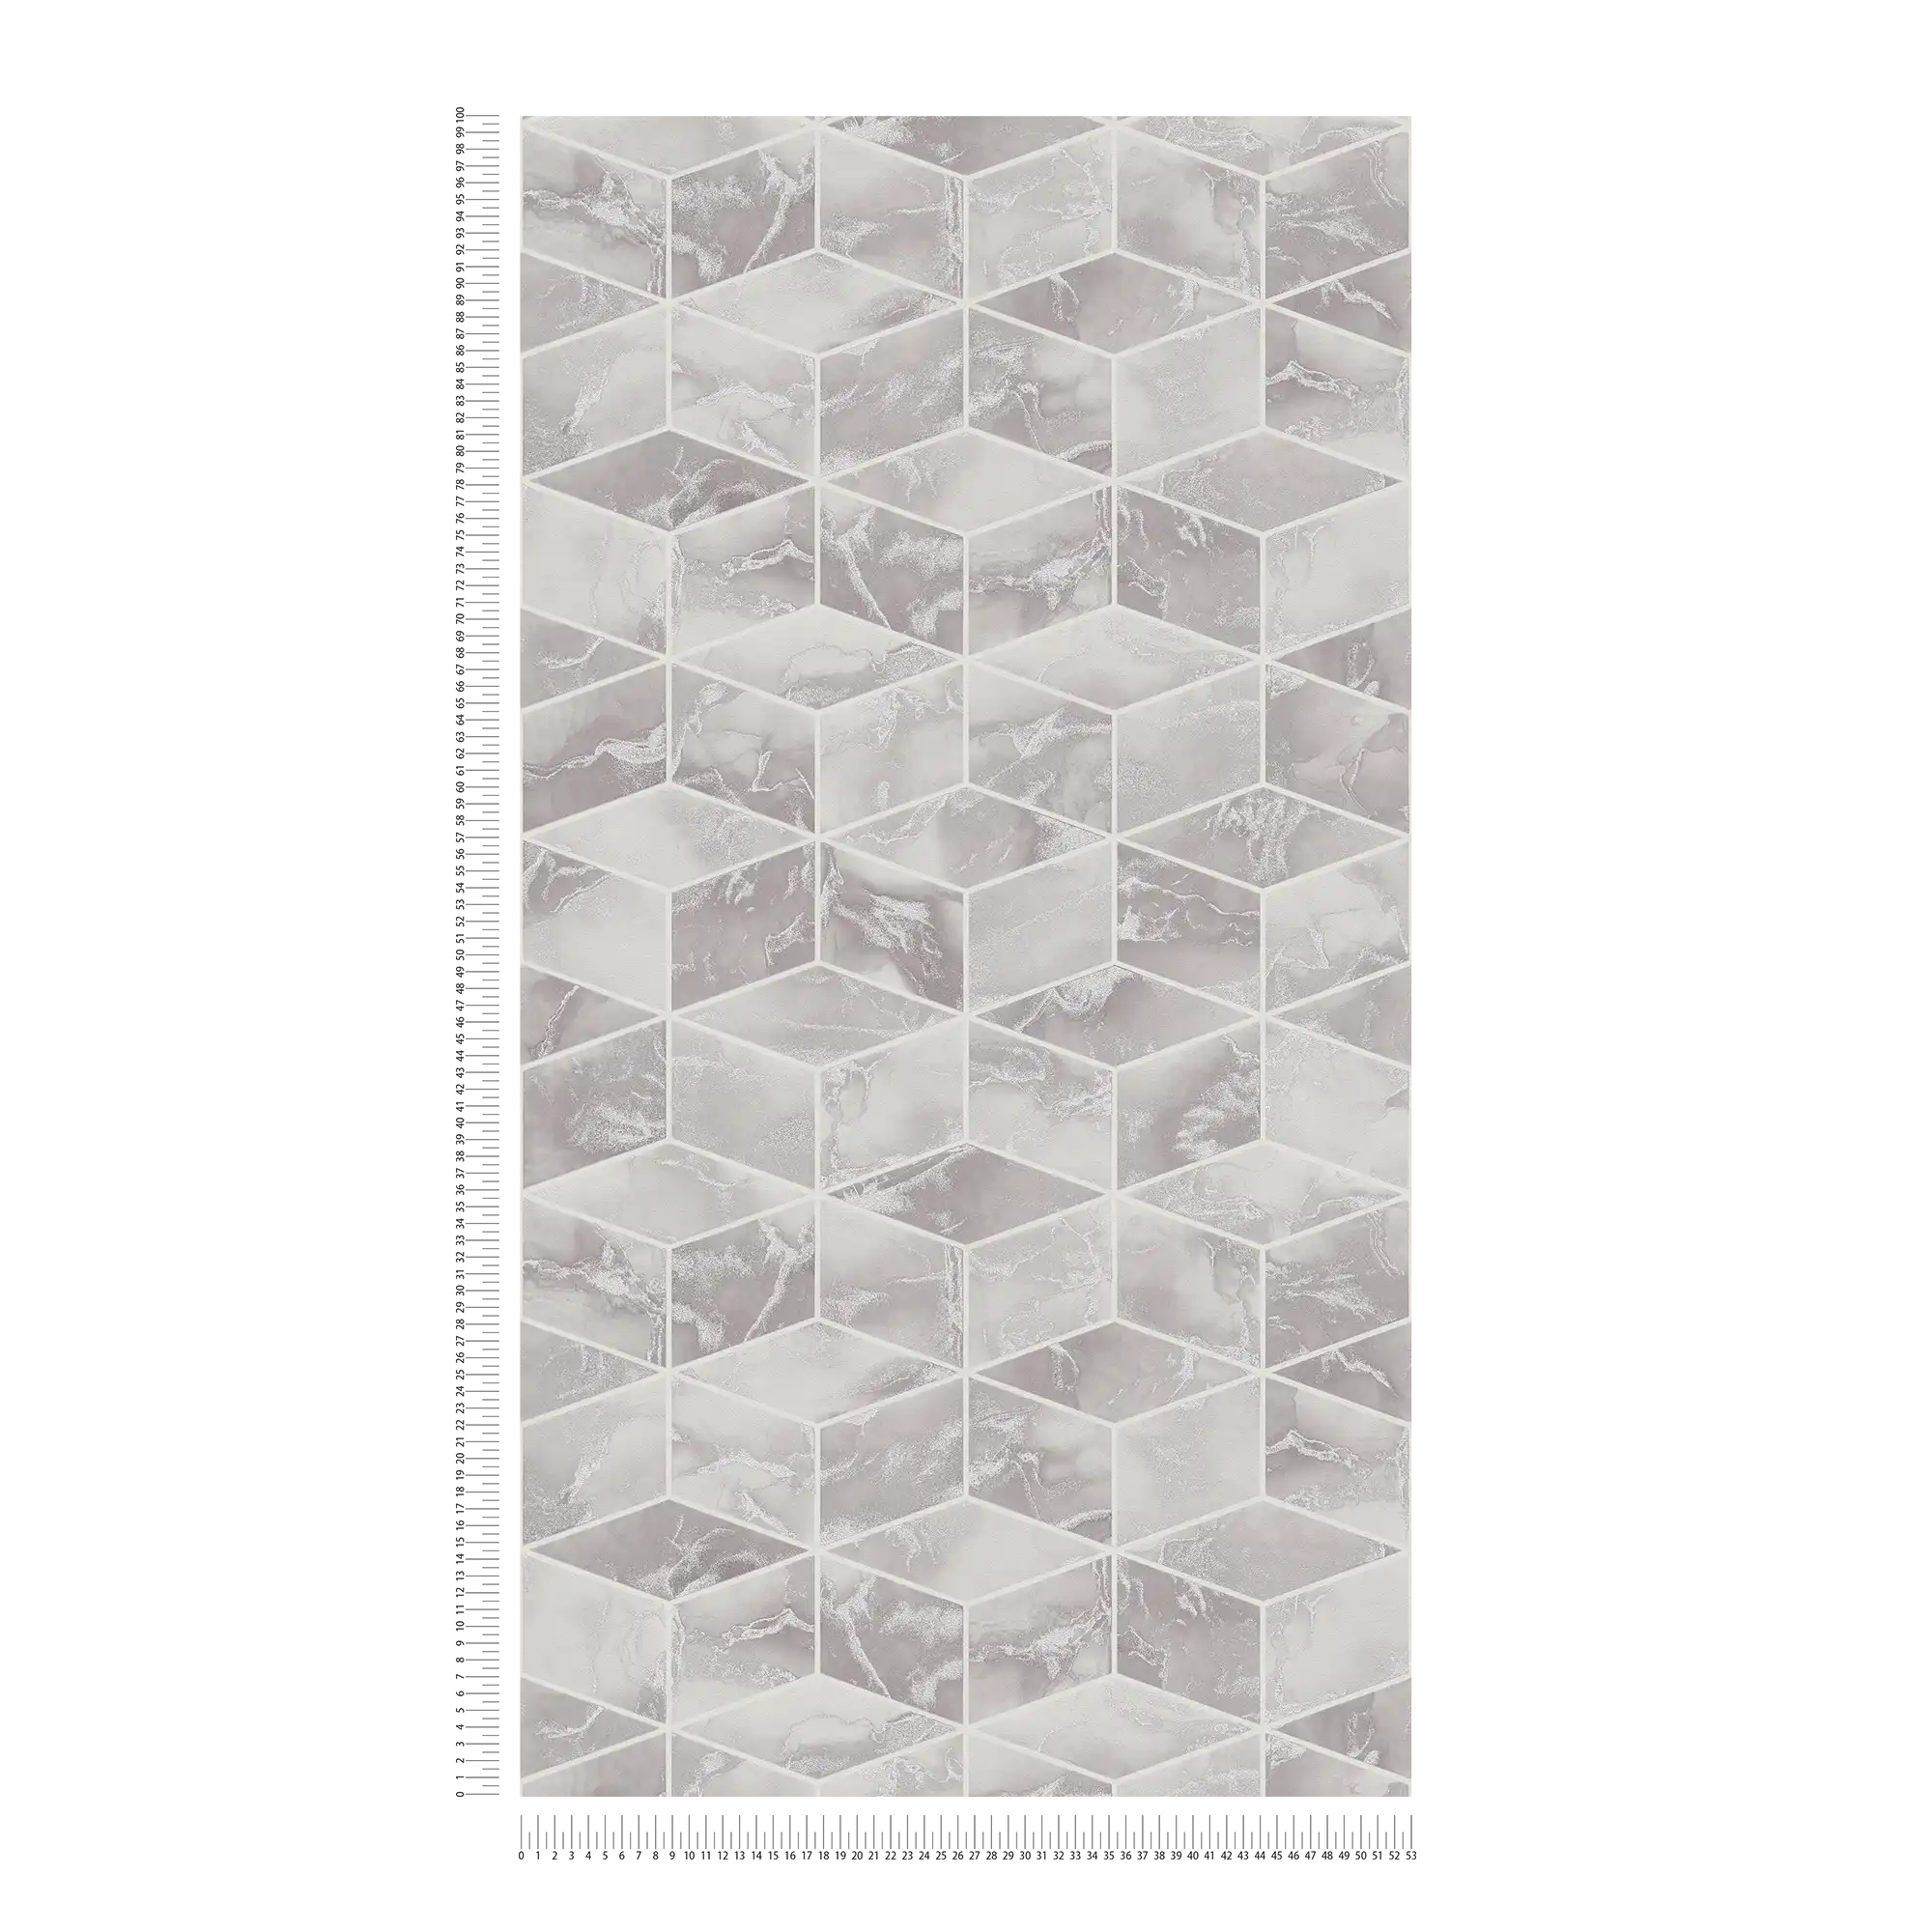             Non-woven wallpaper with marble tiles & gold accent - grey, metallic, white
        